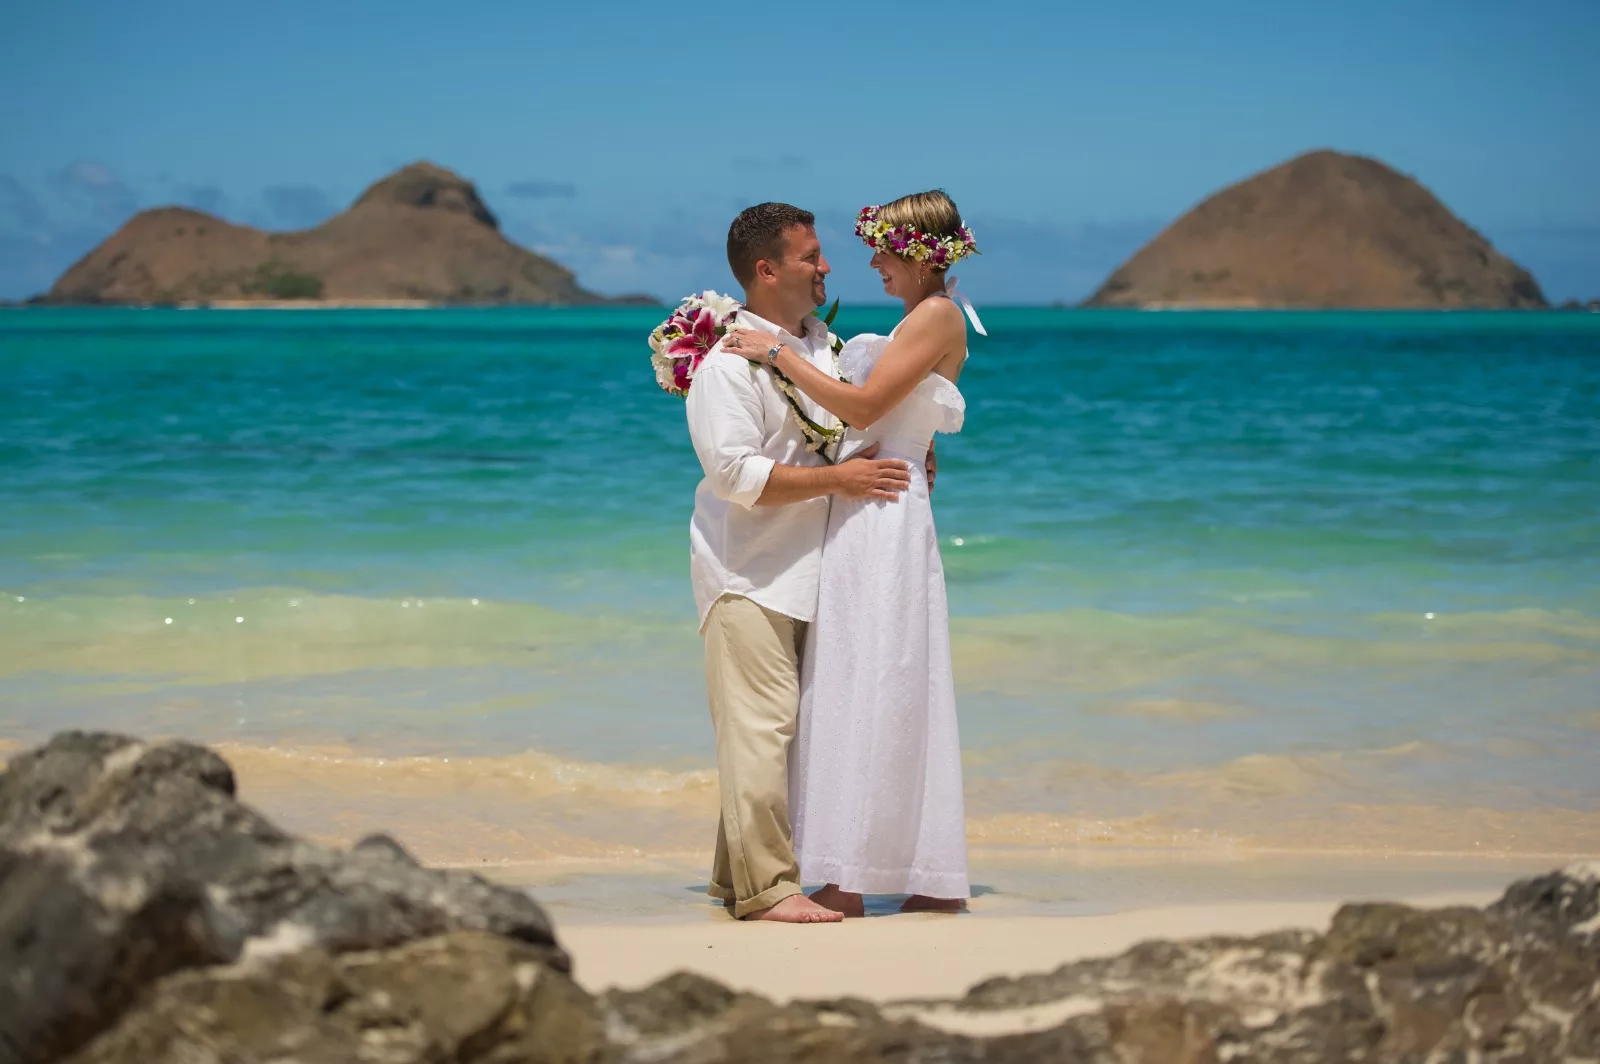 an image of a man and woman in the beach facing and holding each other taken by oahu hawaii photographer